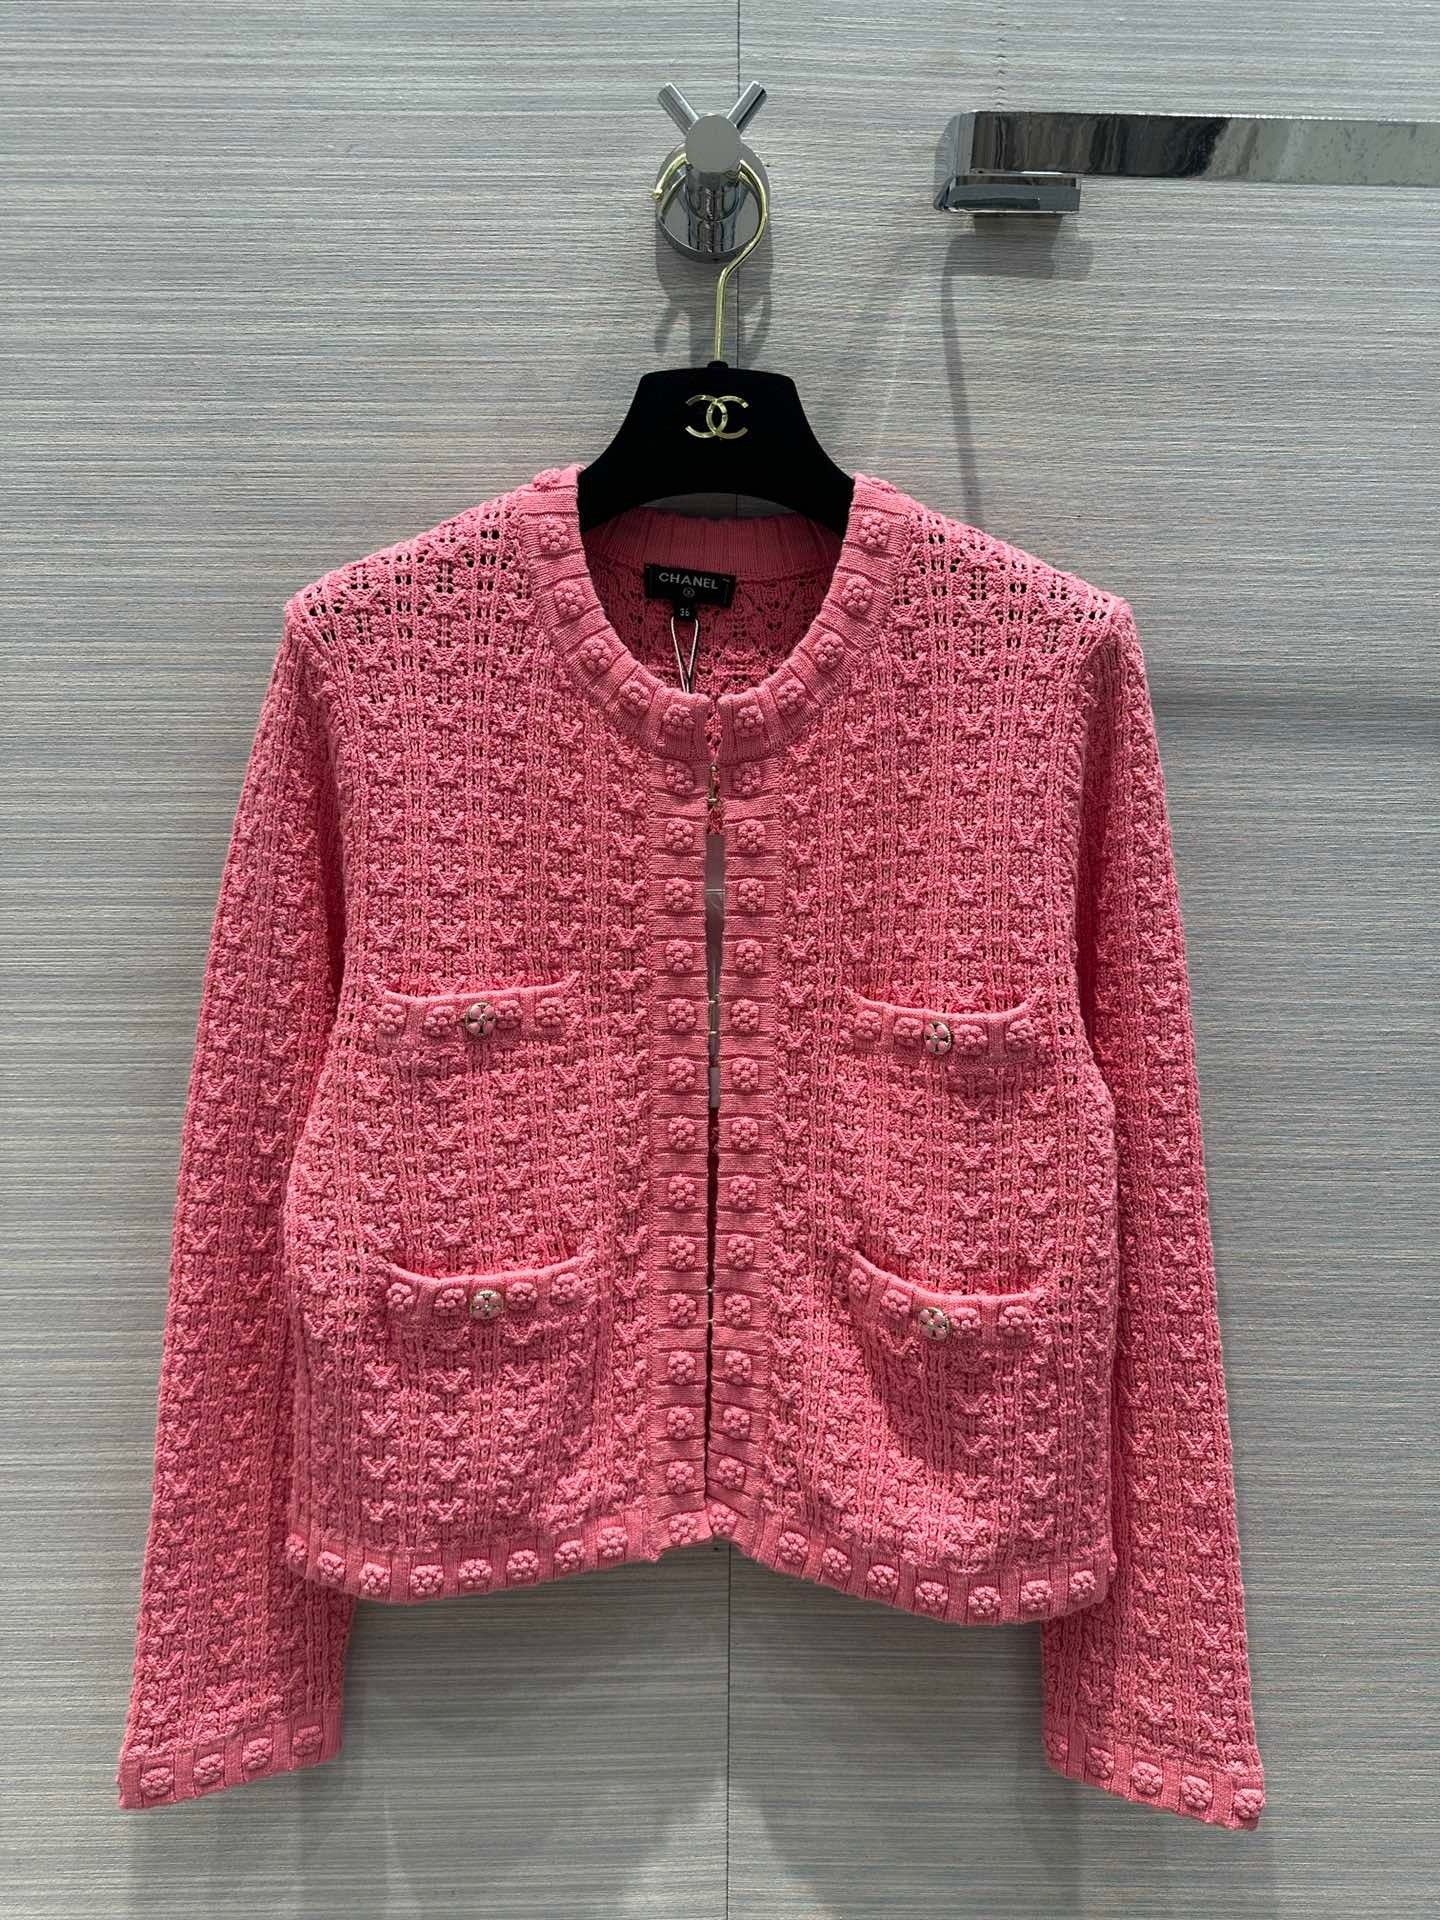 Chanel Clothing Cardigans Wholesale Imitation Designer Replicas
 White Weave Spring/Summer Collection